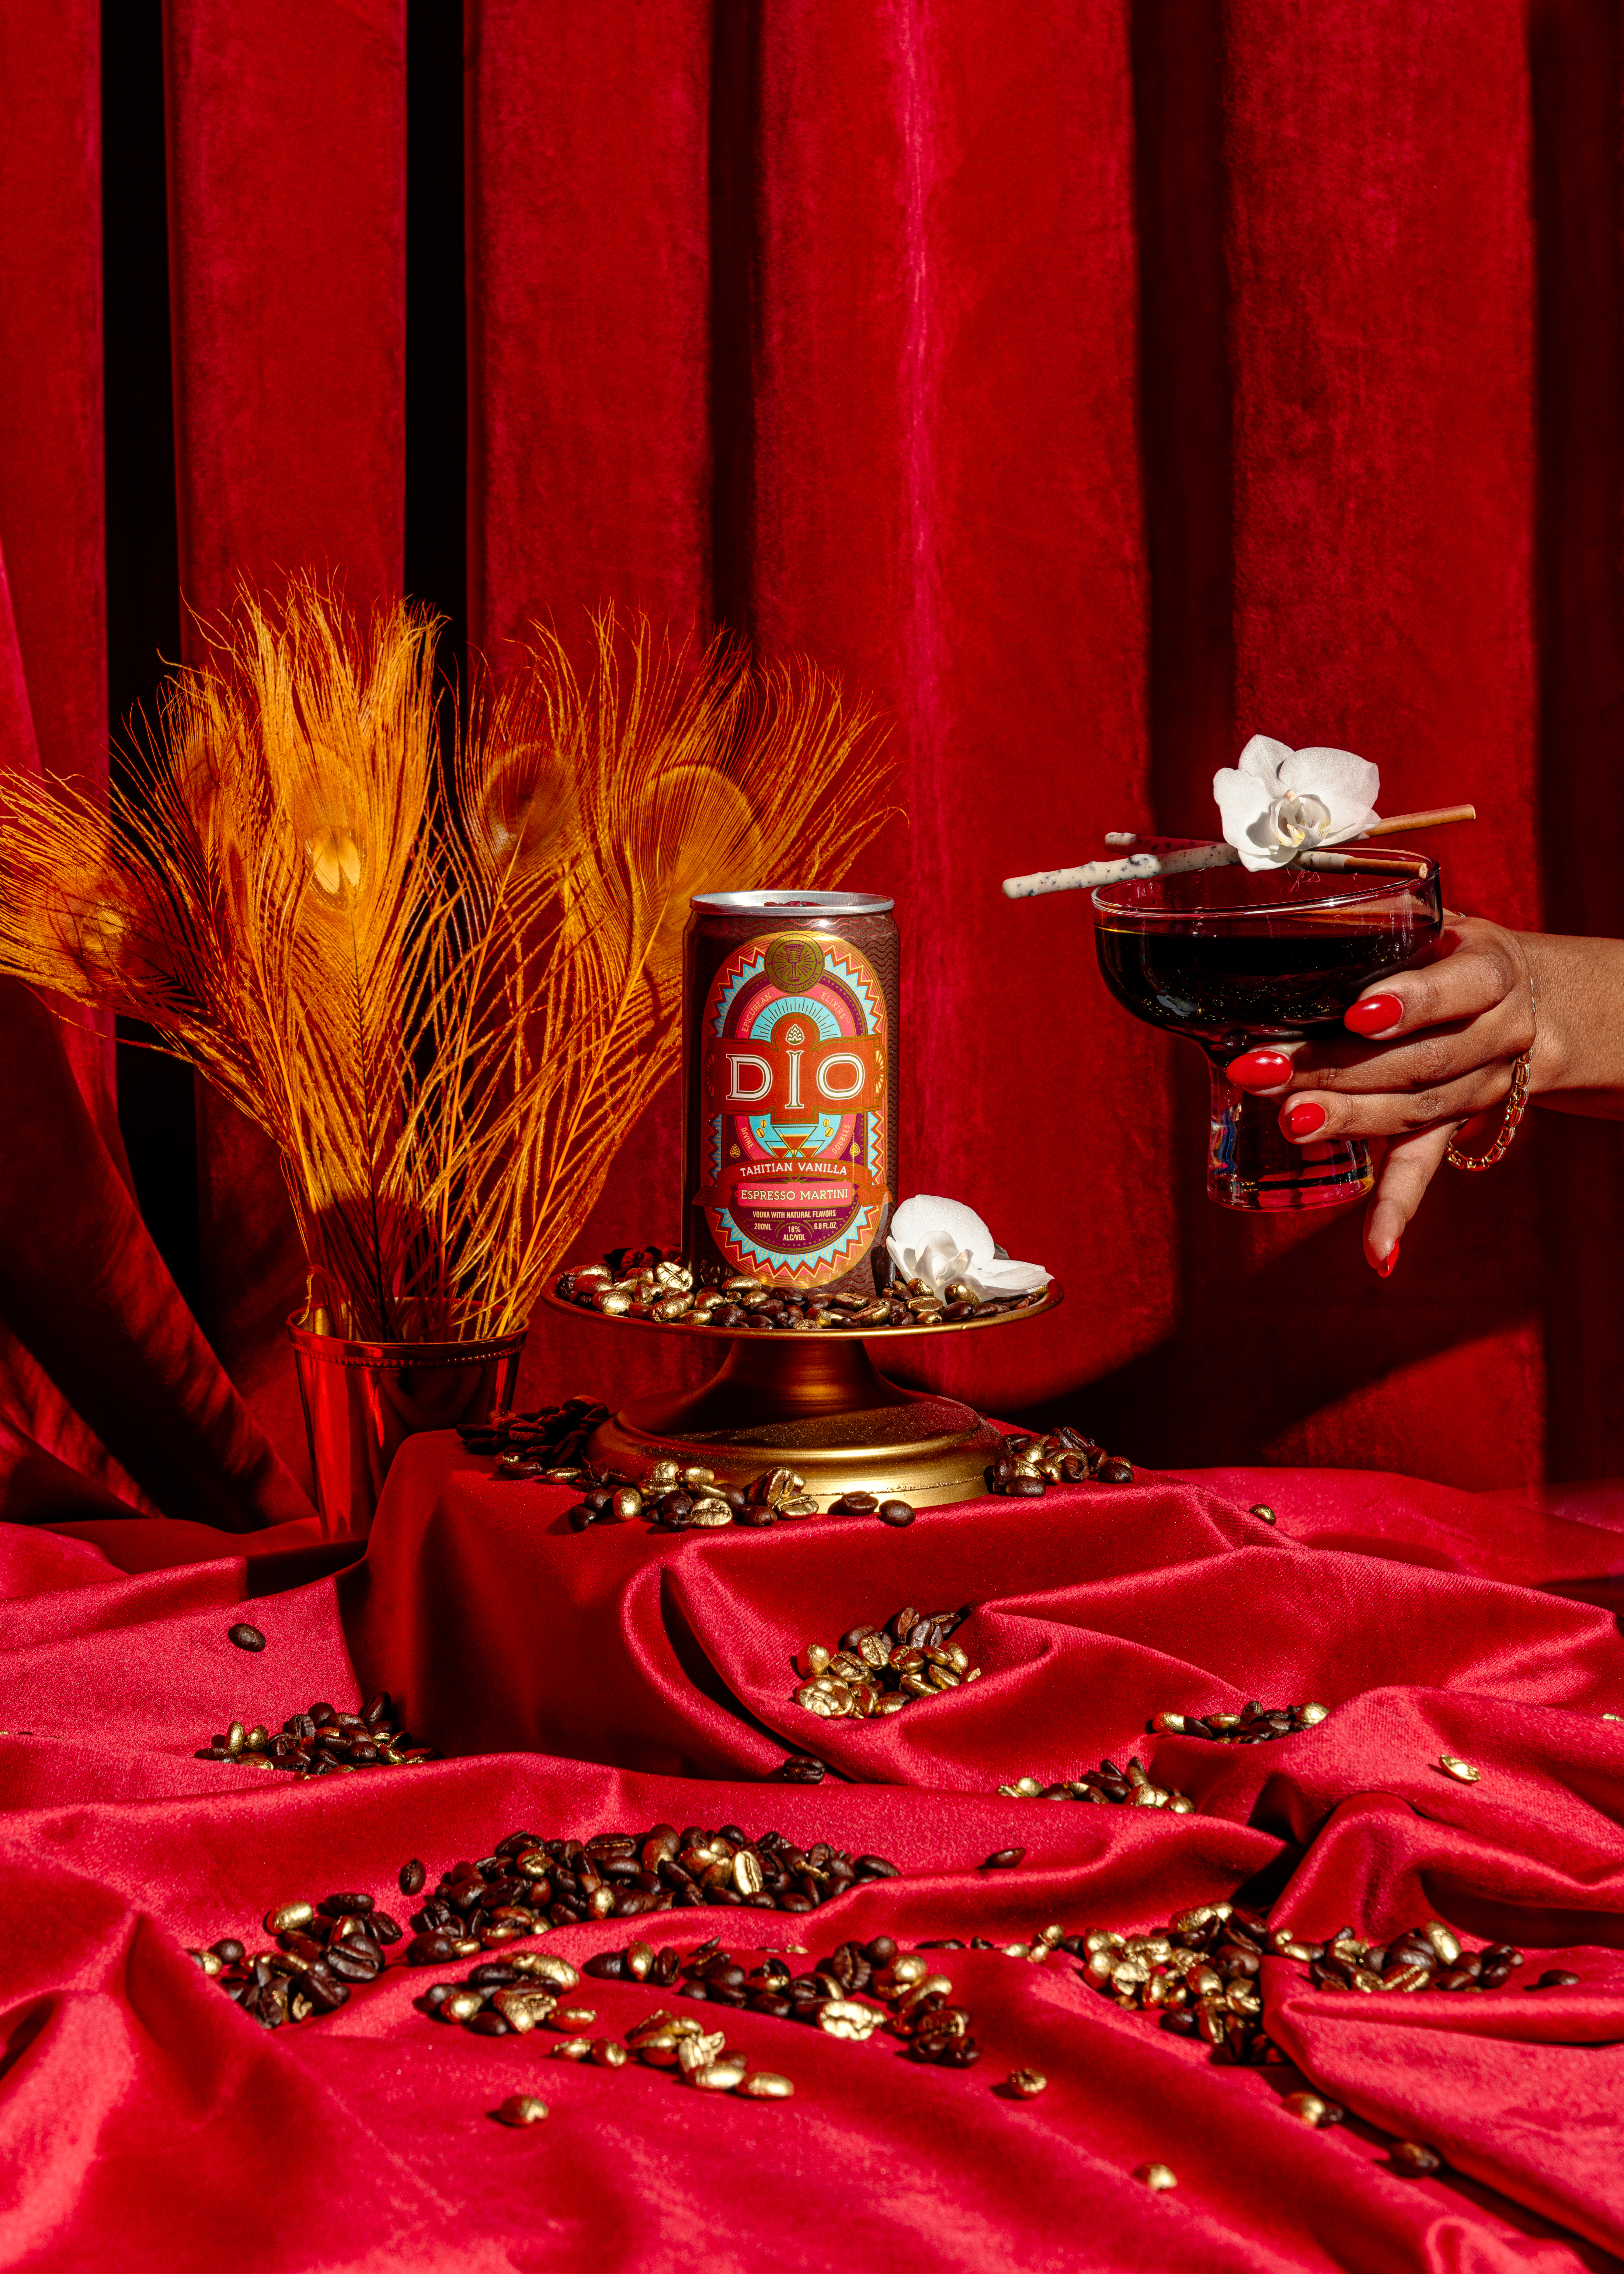 DIO: A New Type Of Mixology With Ready-to-Drink Canned Cocktails